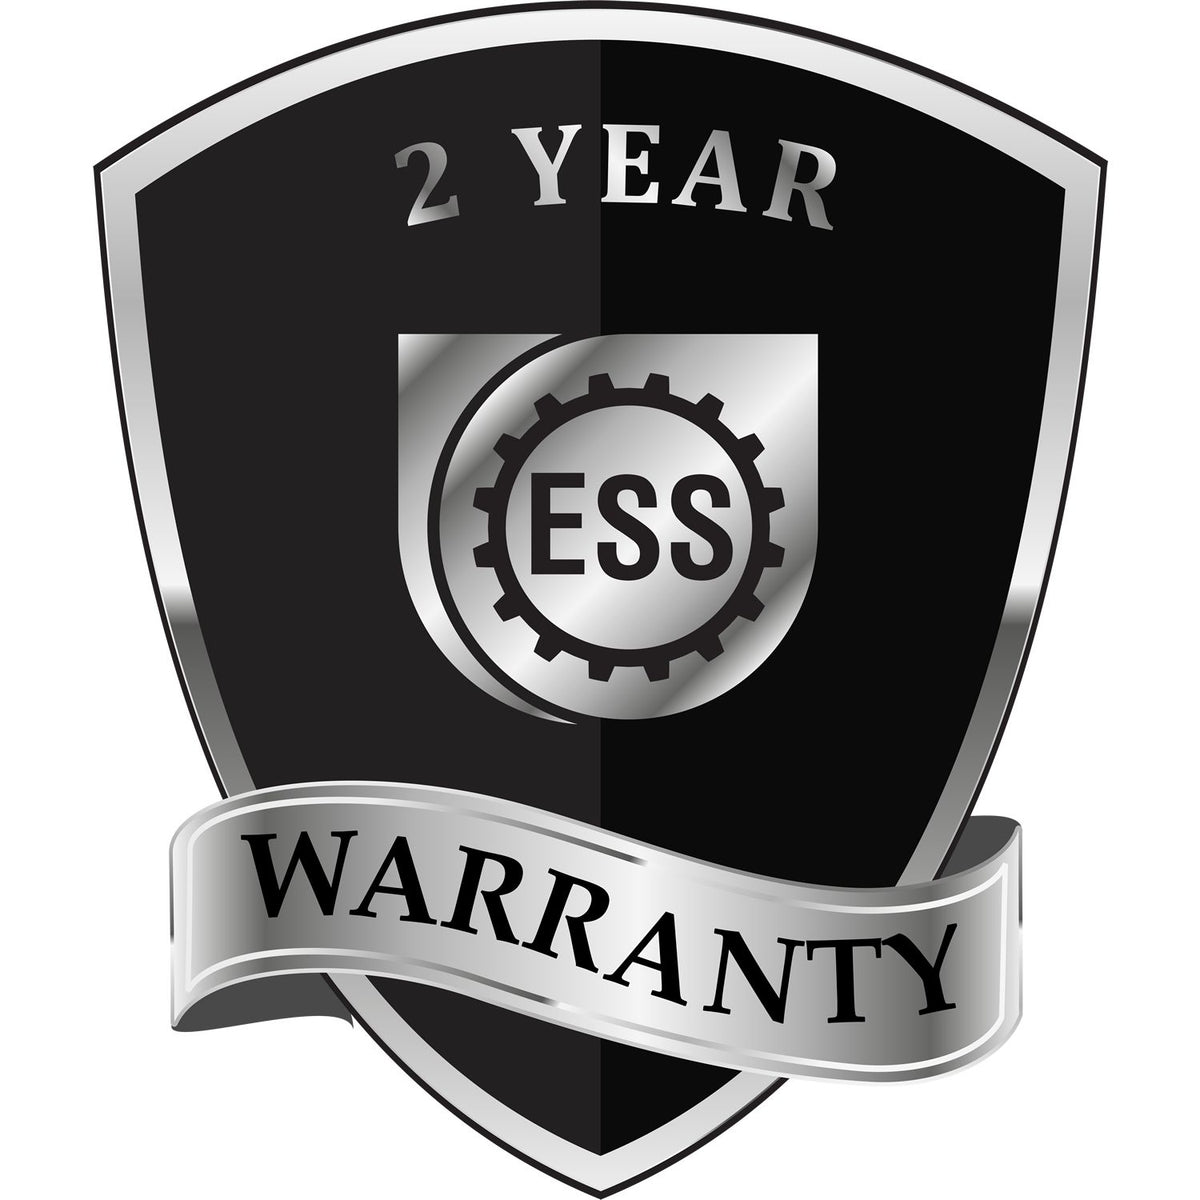 A badge or emblem showing a warranty icon for the Heavy Duty Cast Iron Florida Land Surveyor Seal Embosser